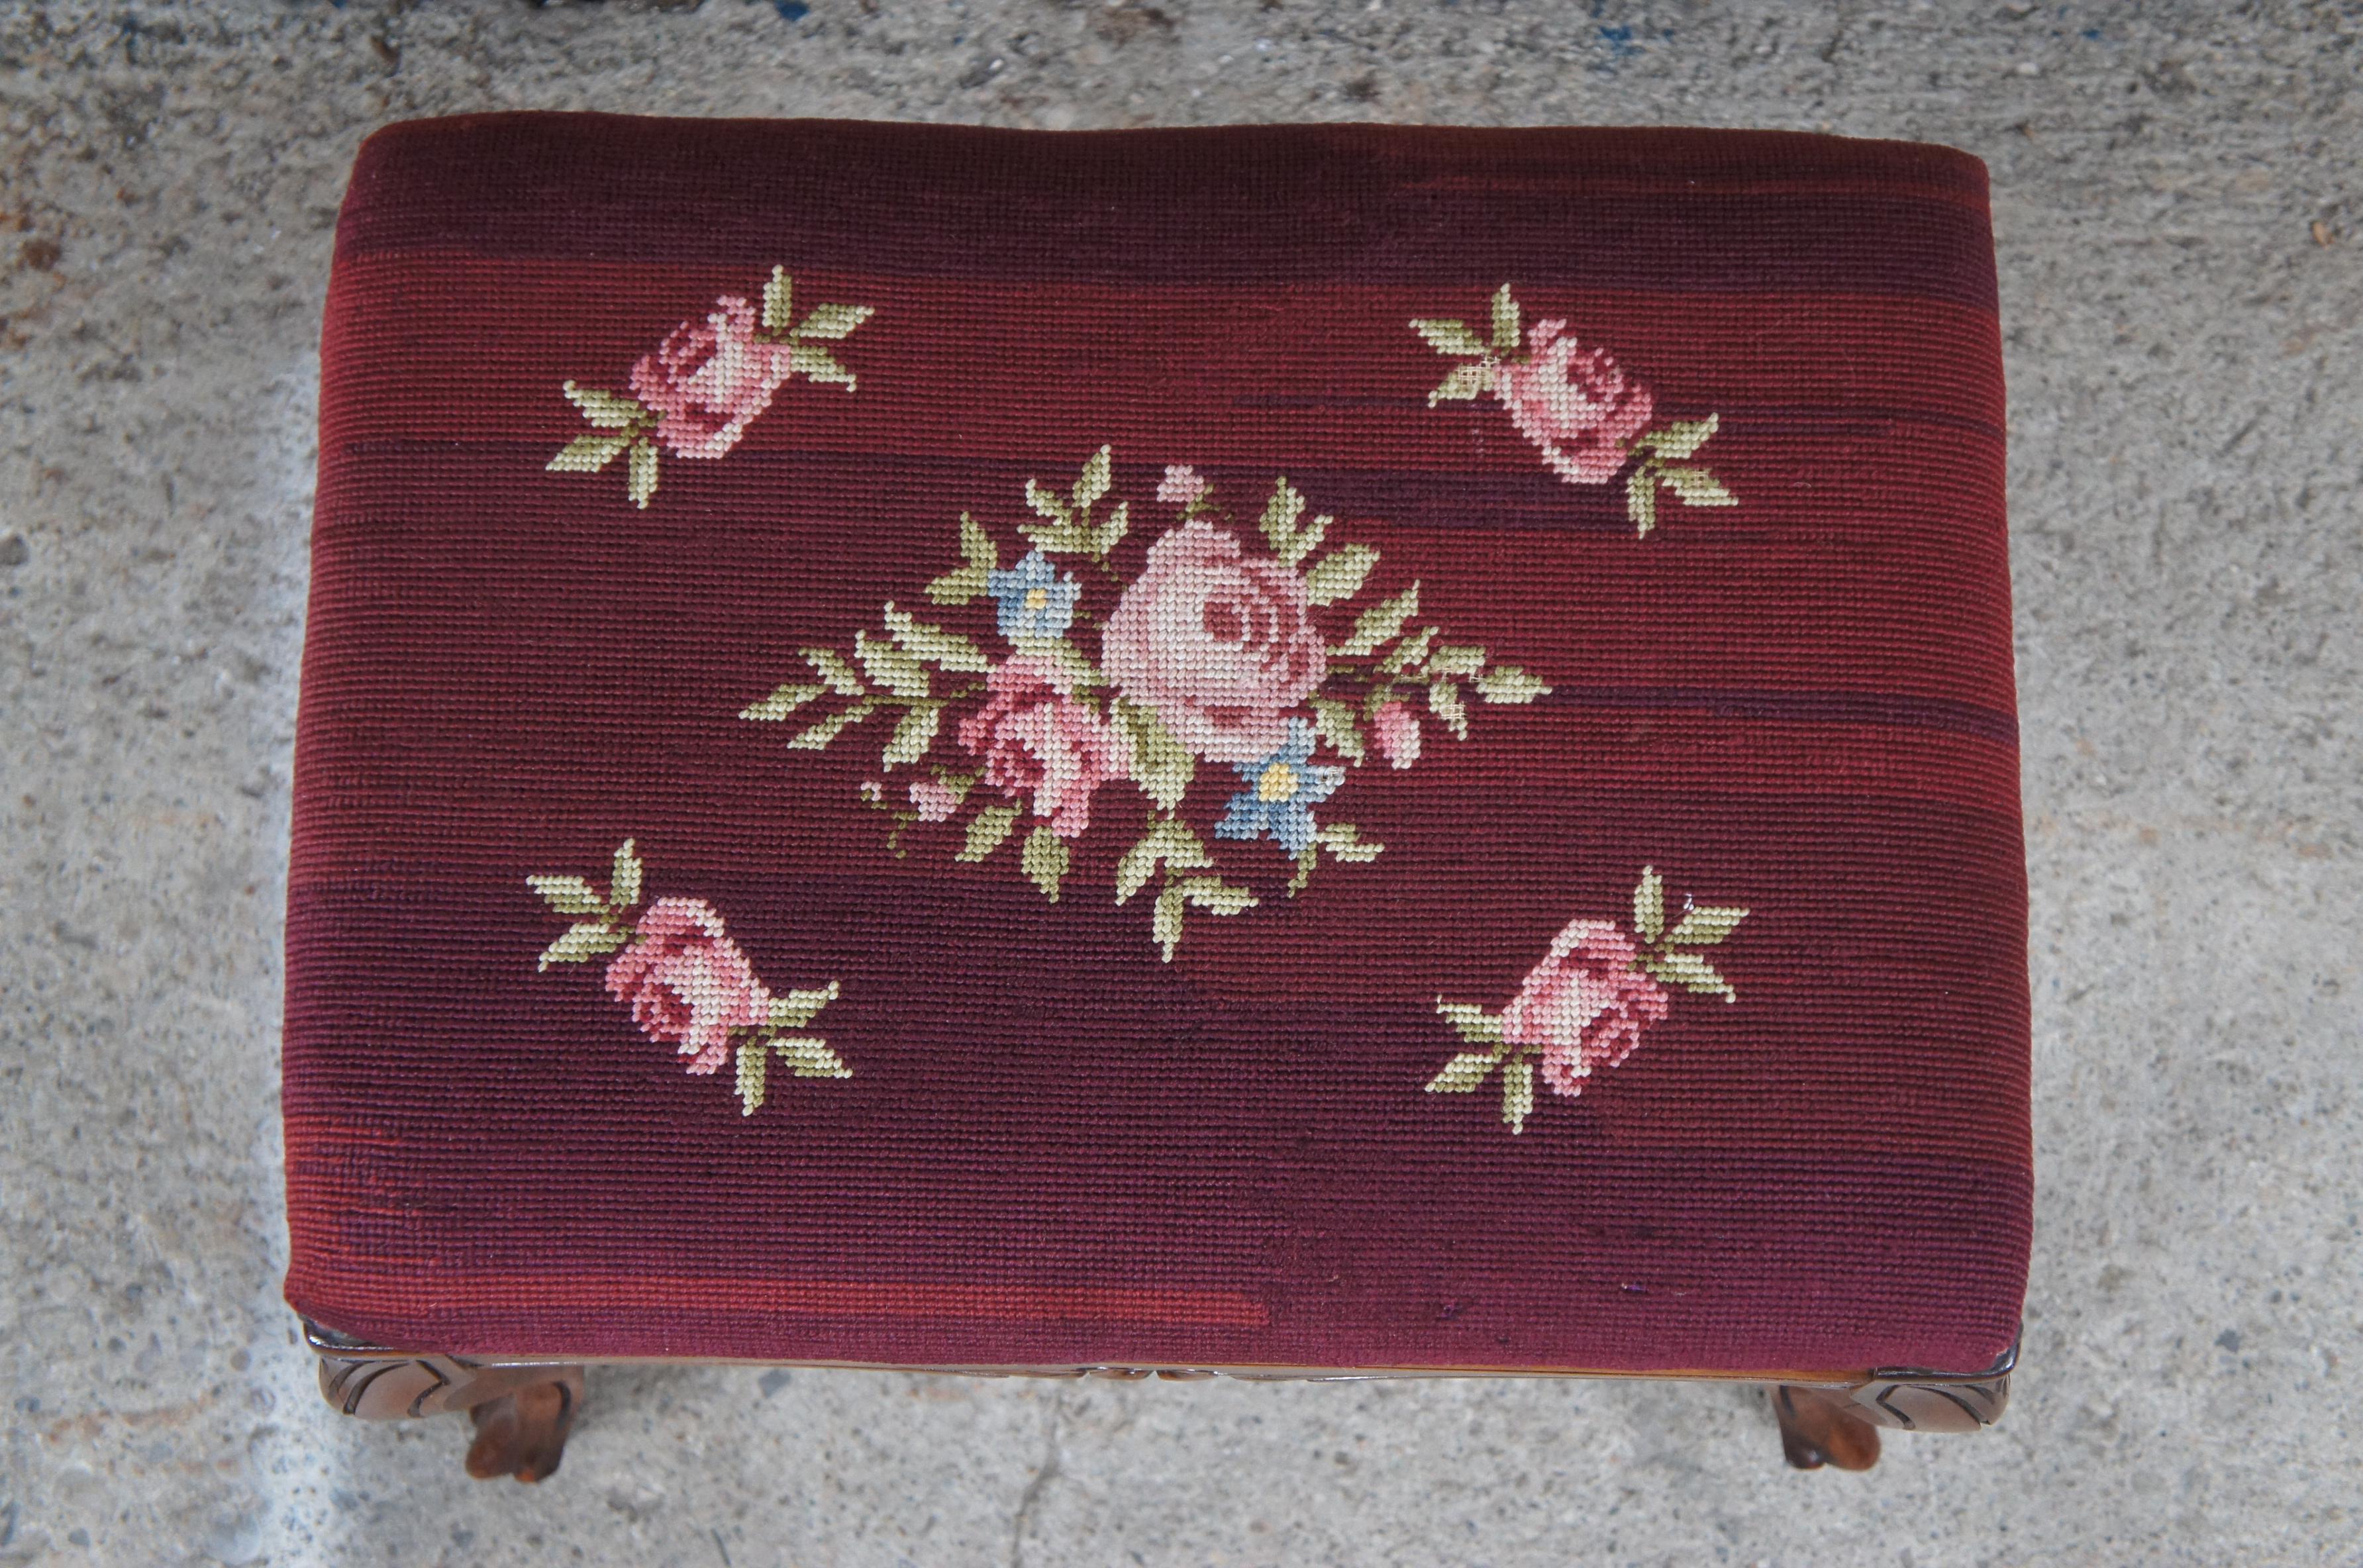 20th Century Vintage H. Niehoff French Provincial Piano Foyer Bench Ottoman Embroidered Seat